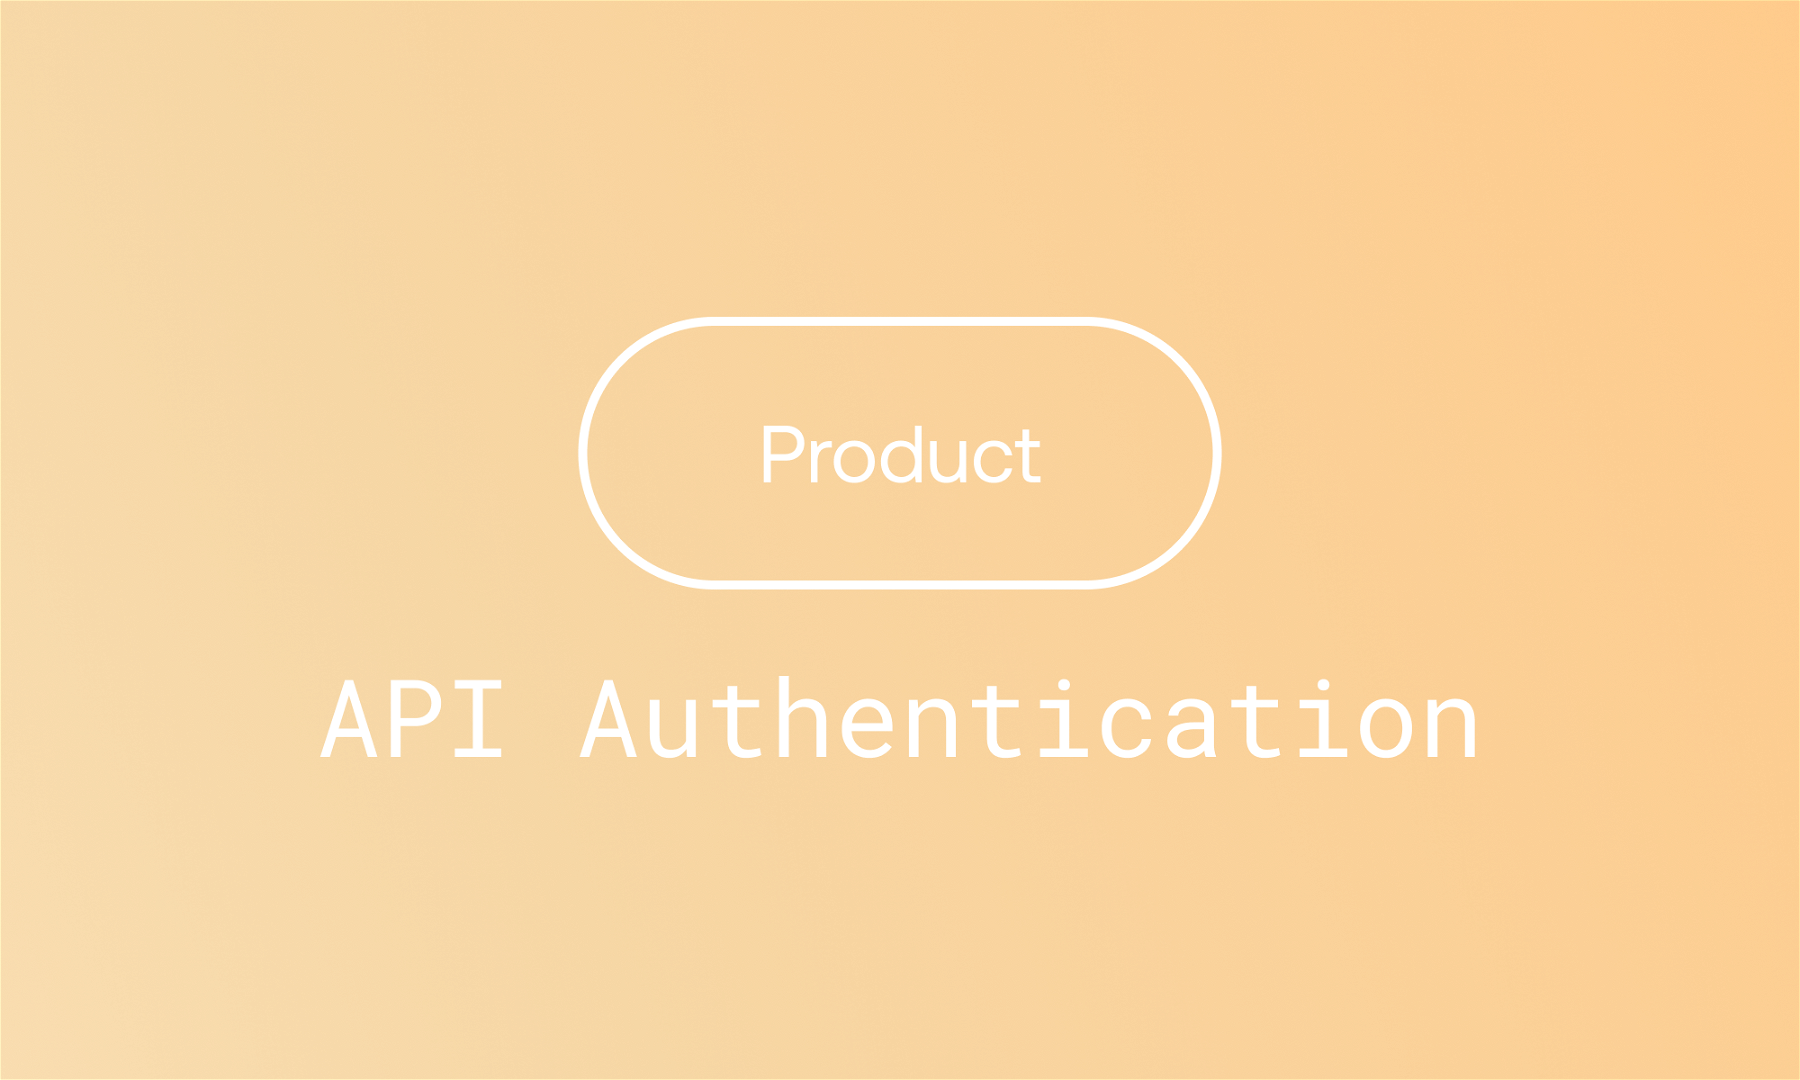 How to Authenticate with Vital’s API